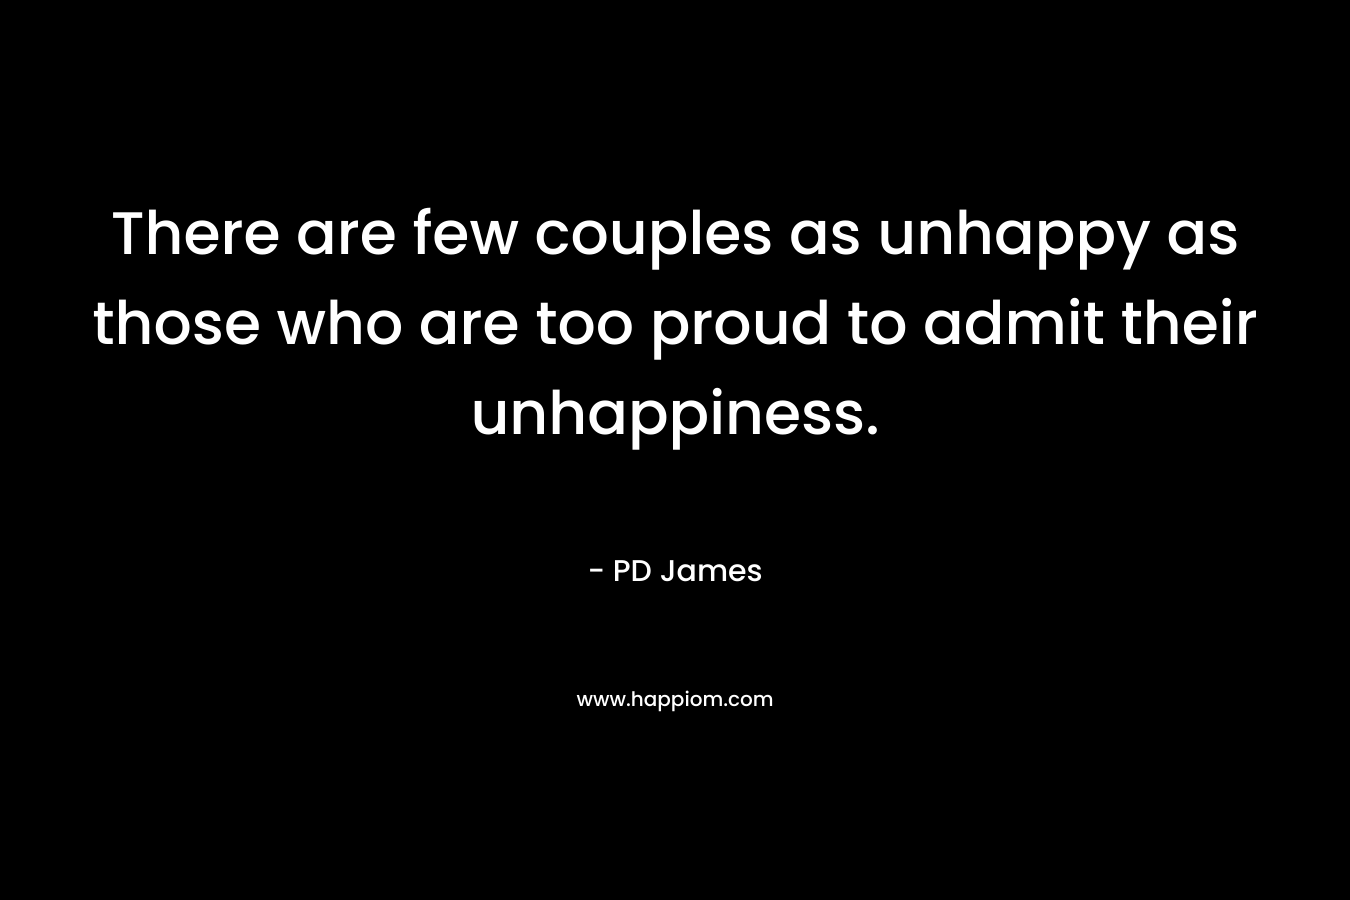 There are few couples as unhappy as those who are too proud to admit their unhappiness.